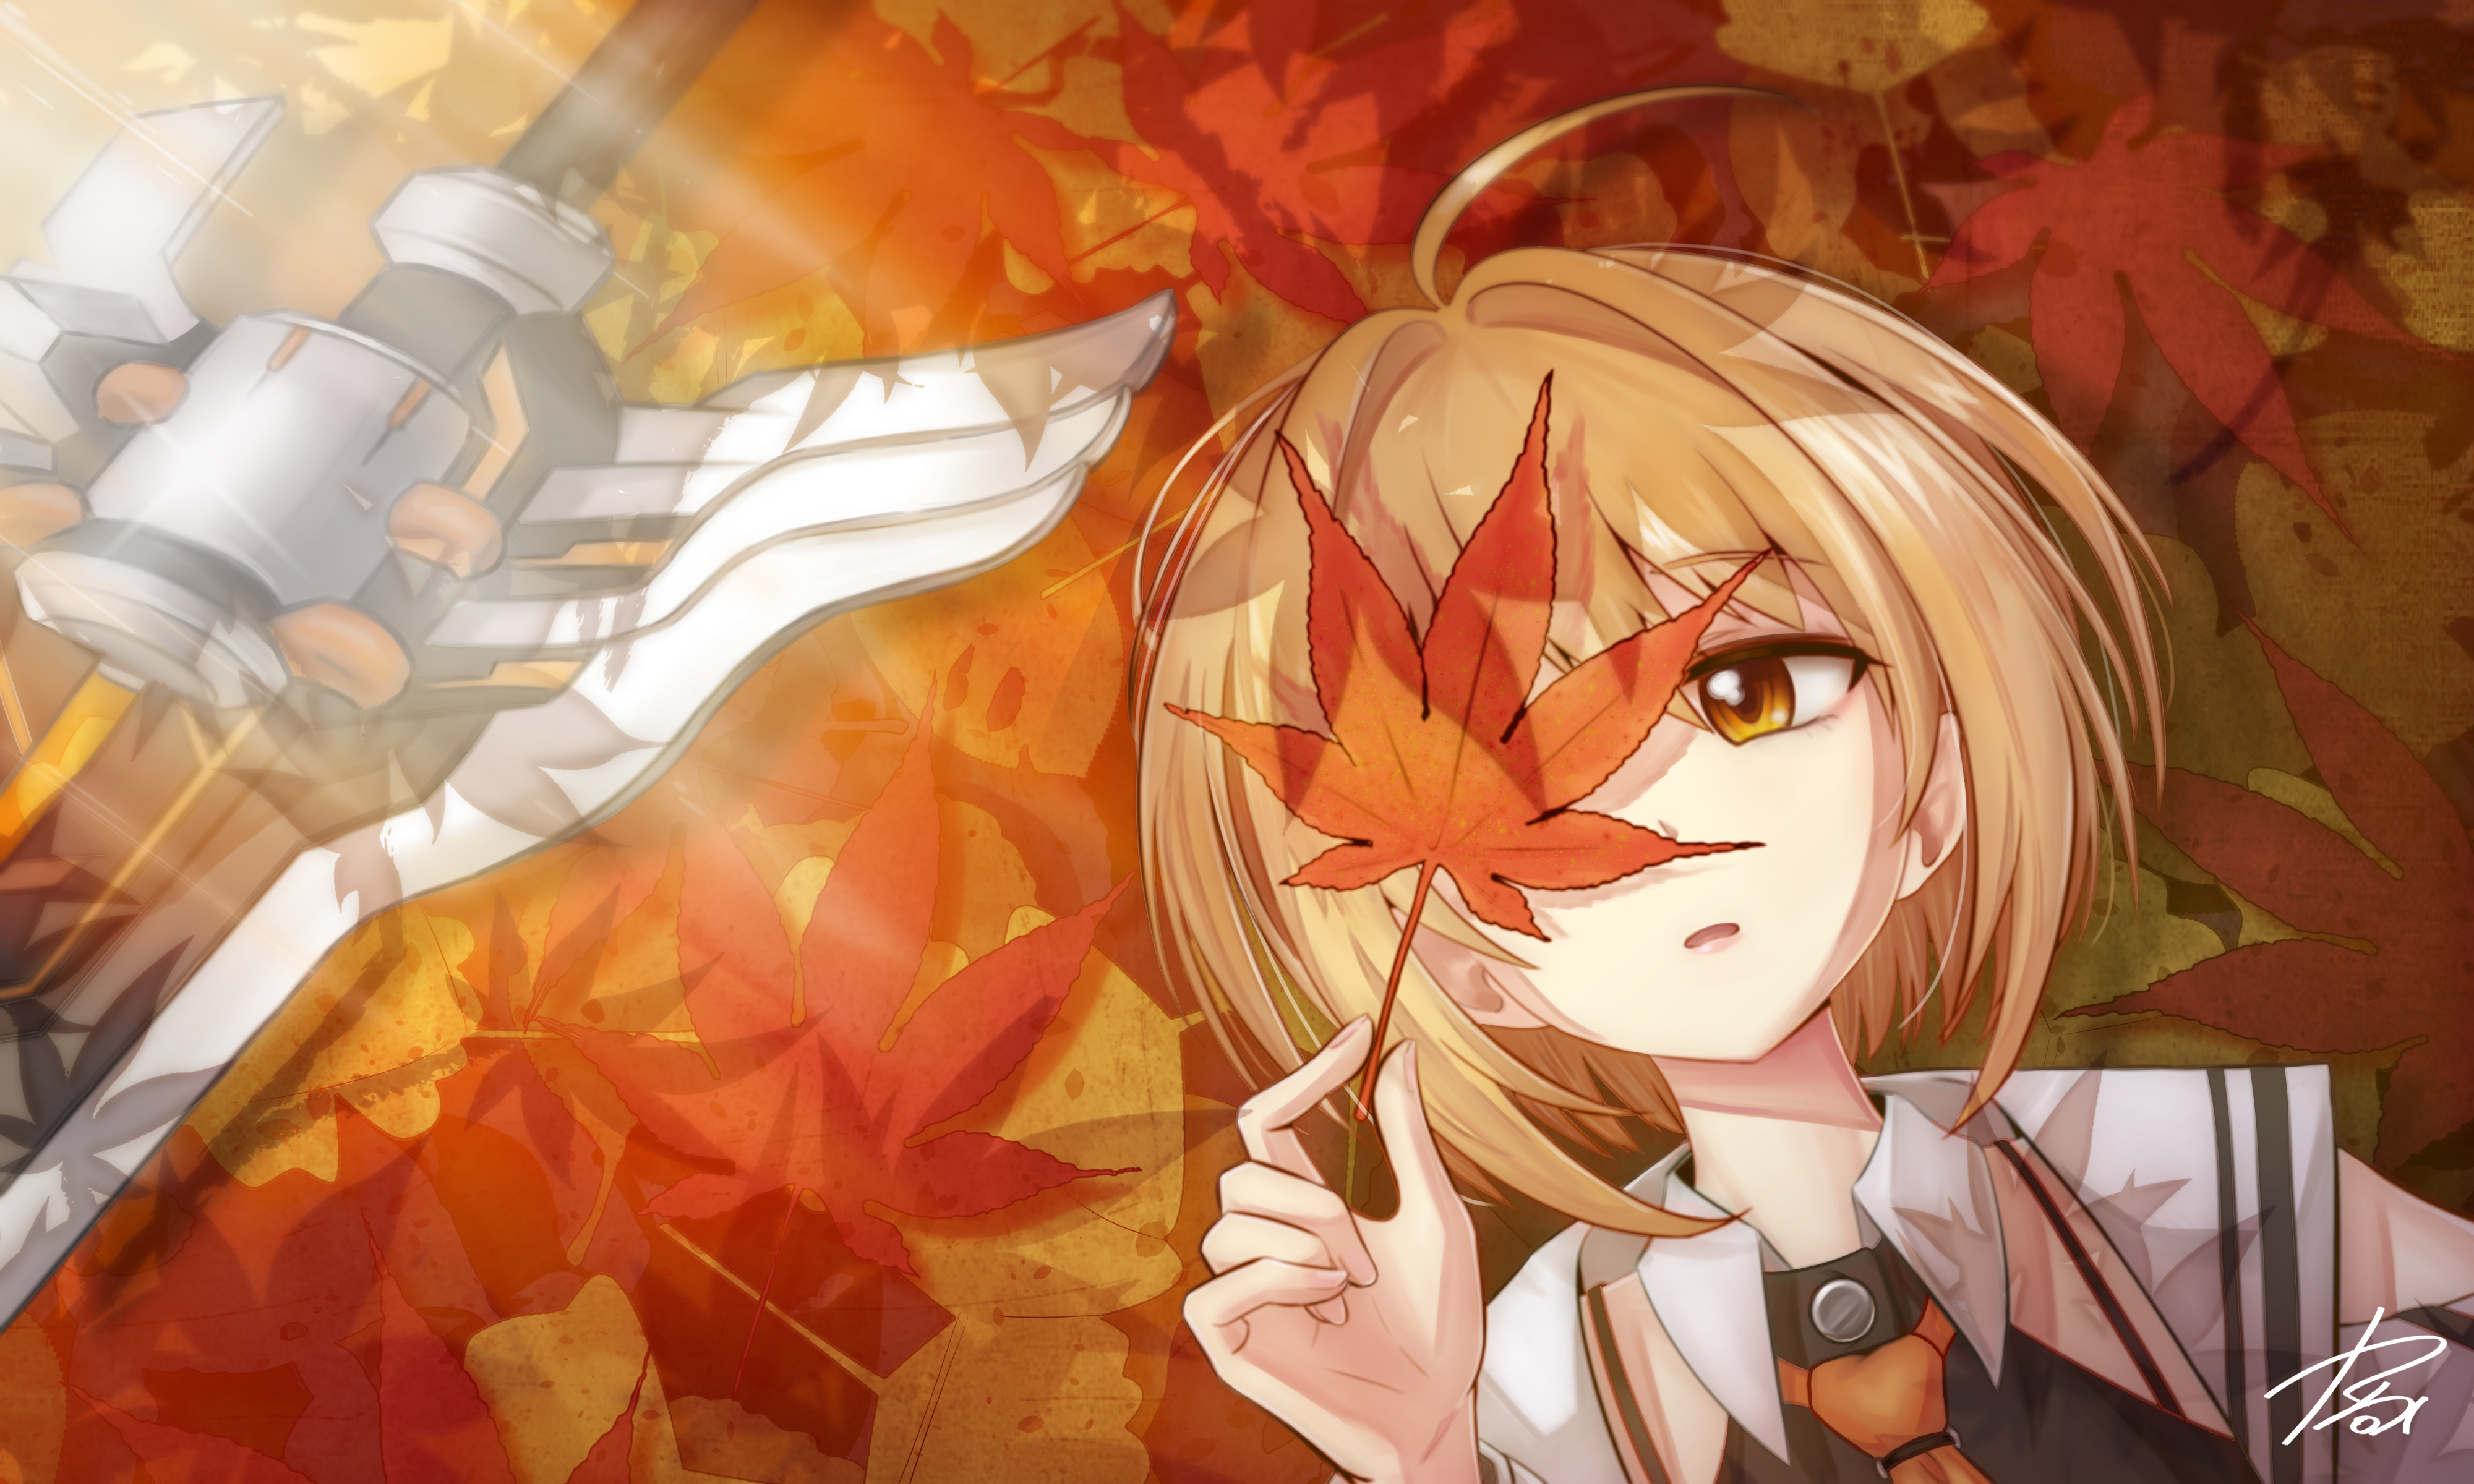 Anime 4000x2400 Soulworker Soulworkers anime girls sword fall